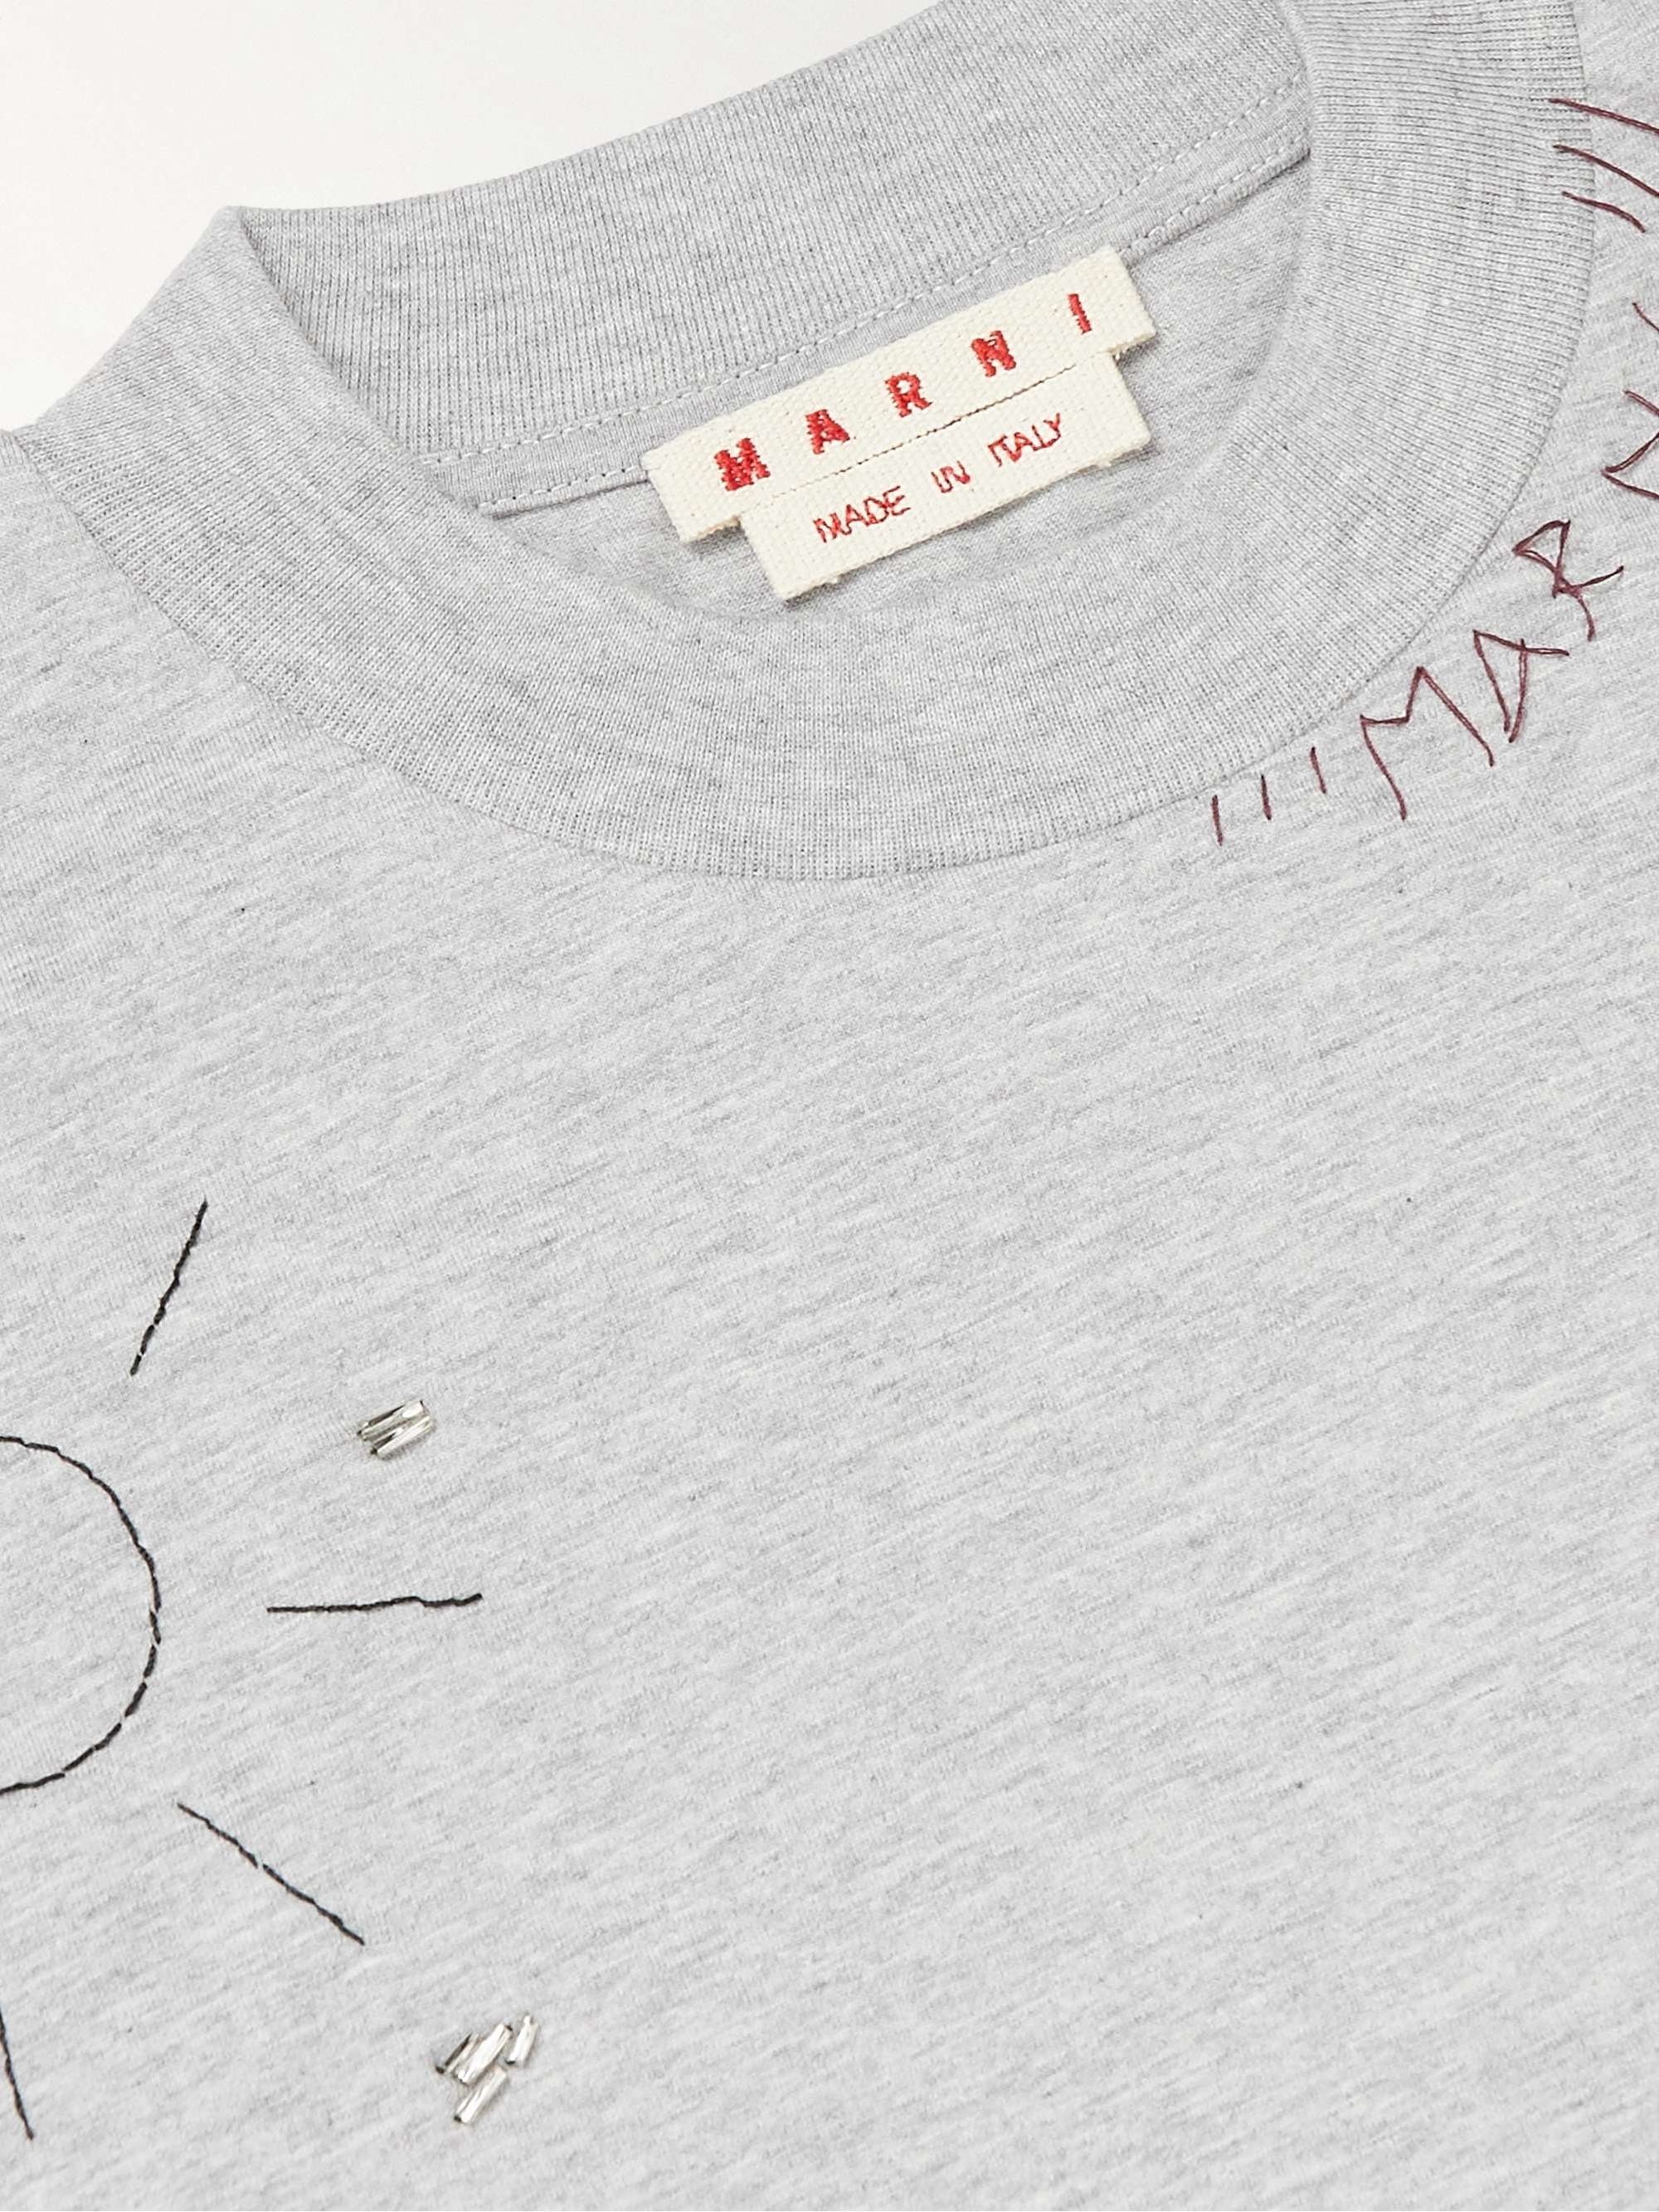 MARNI Bead-Embellished Embroidered Cotton-Jersey T-Shirt